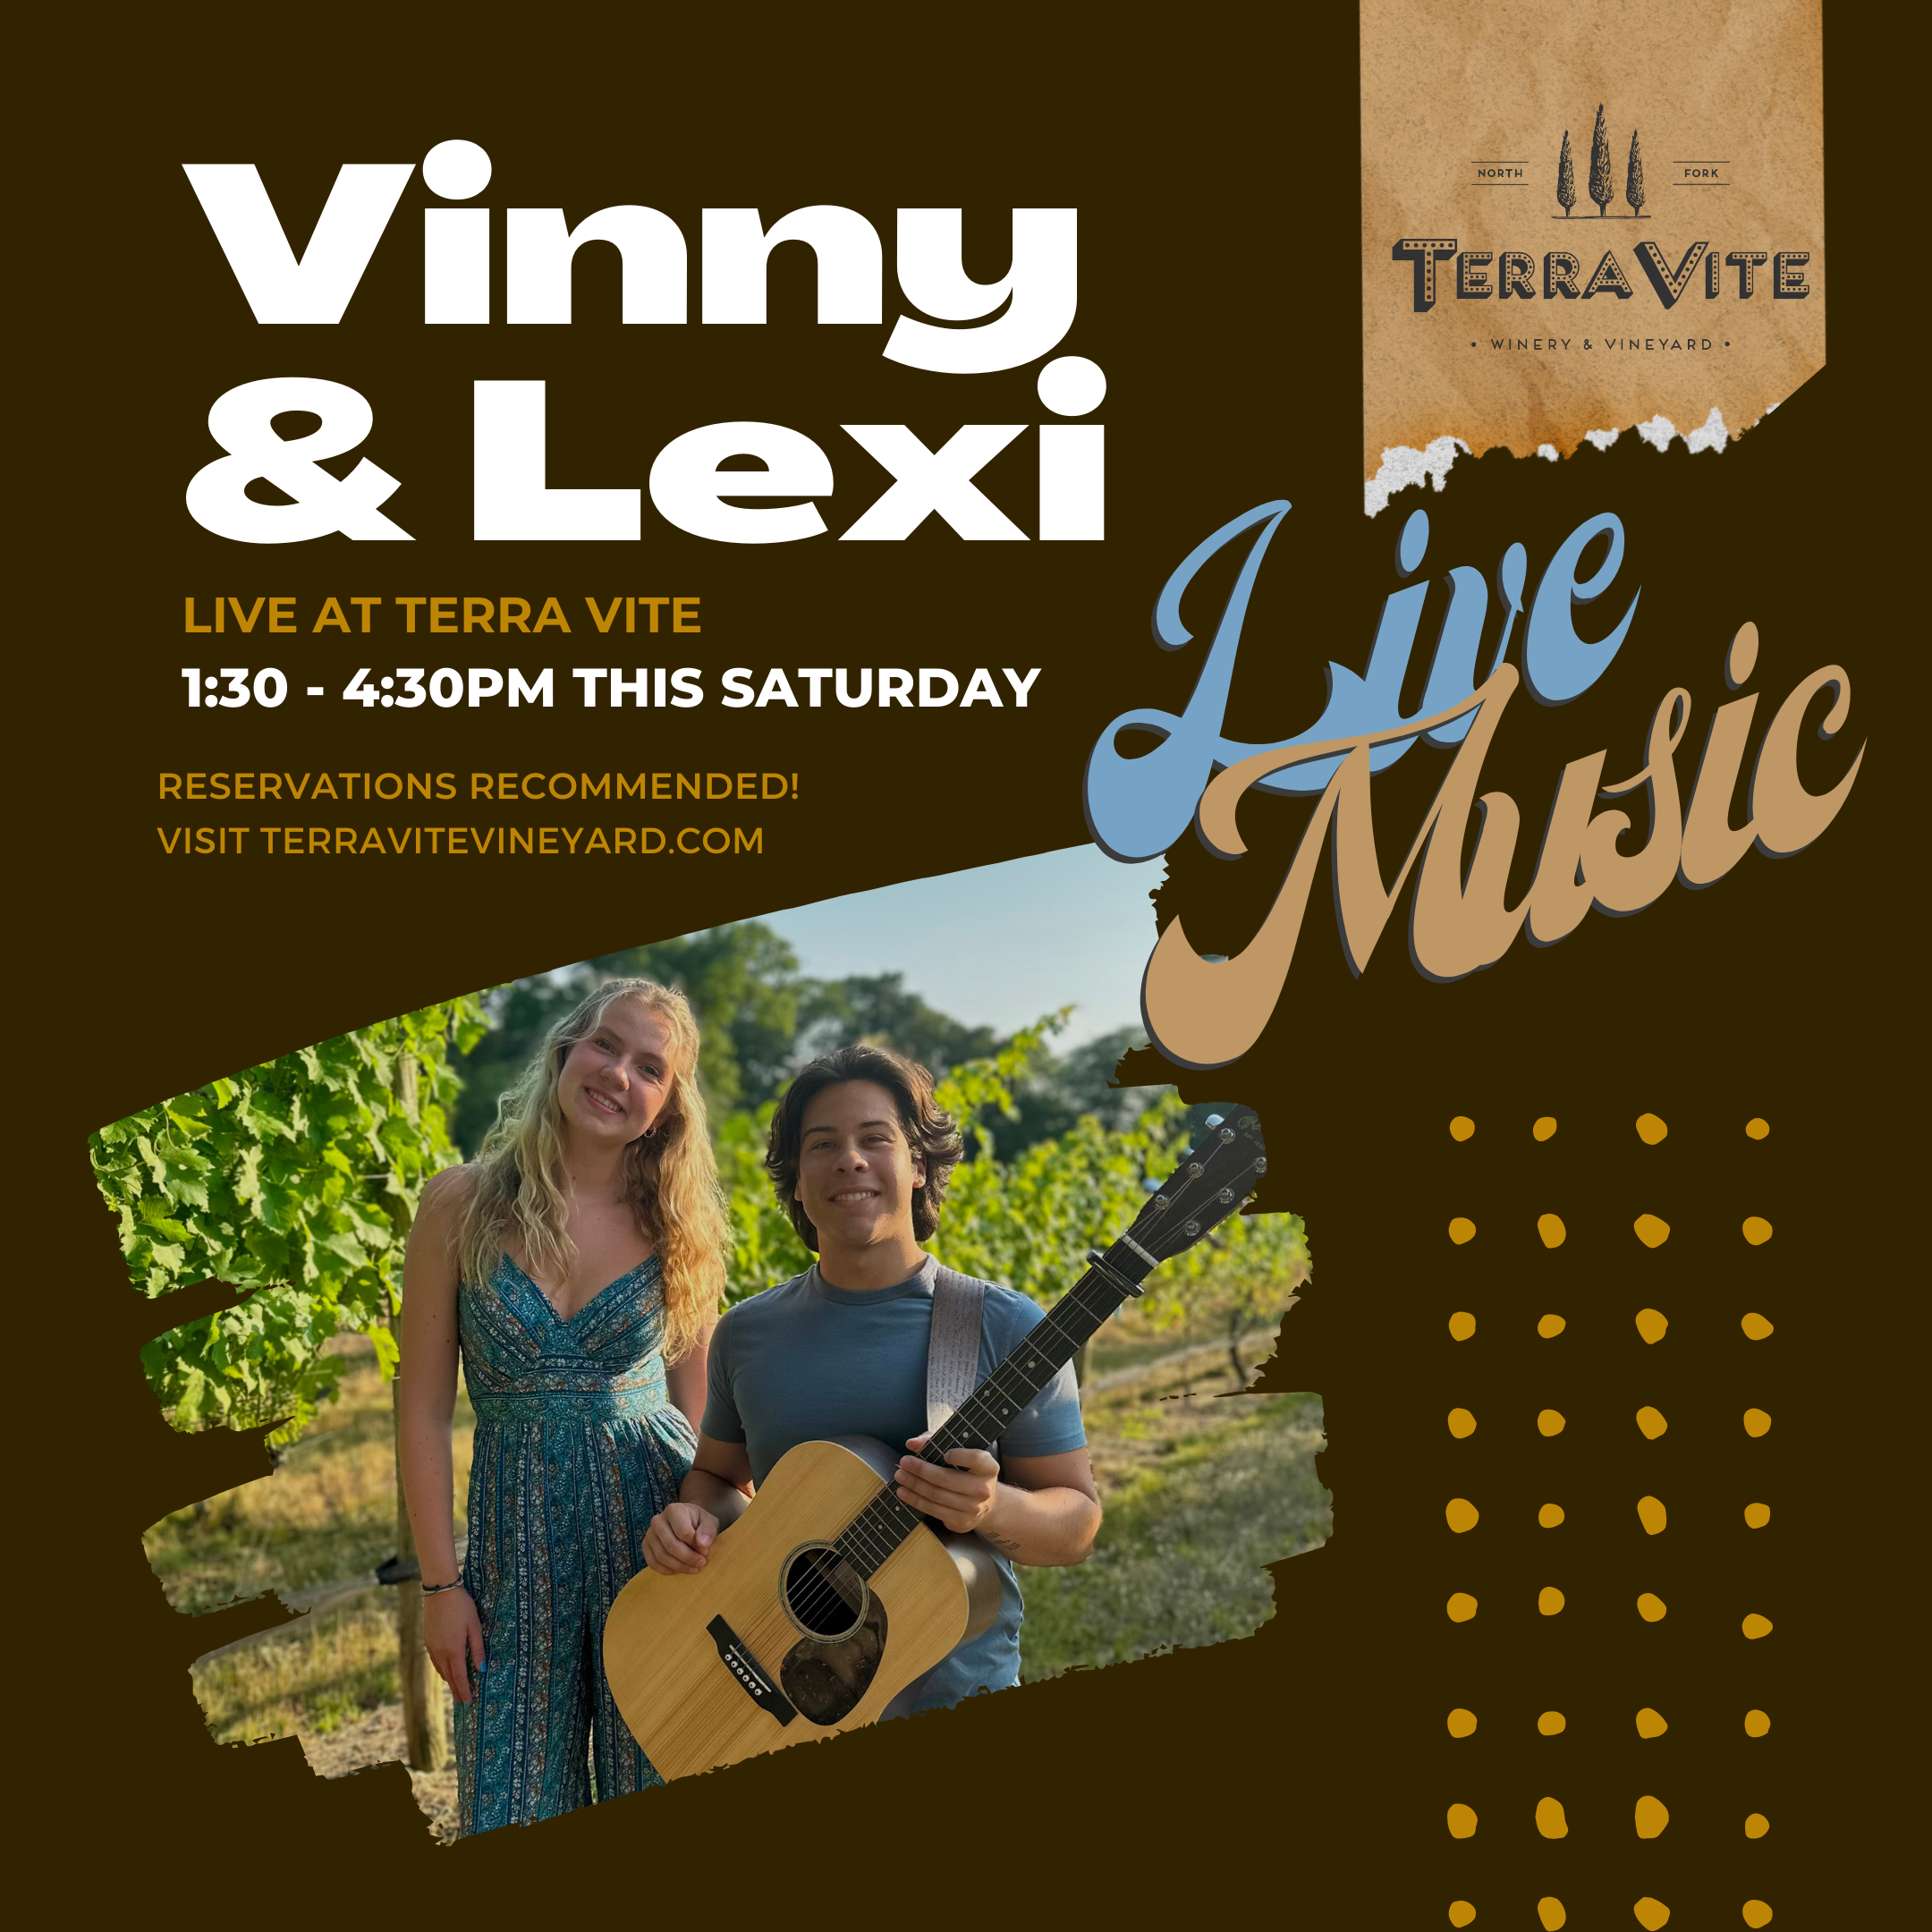 Live Music this Saturday afternoon from 1:30pm to 4:30pm with Vinny & Lexi!